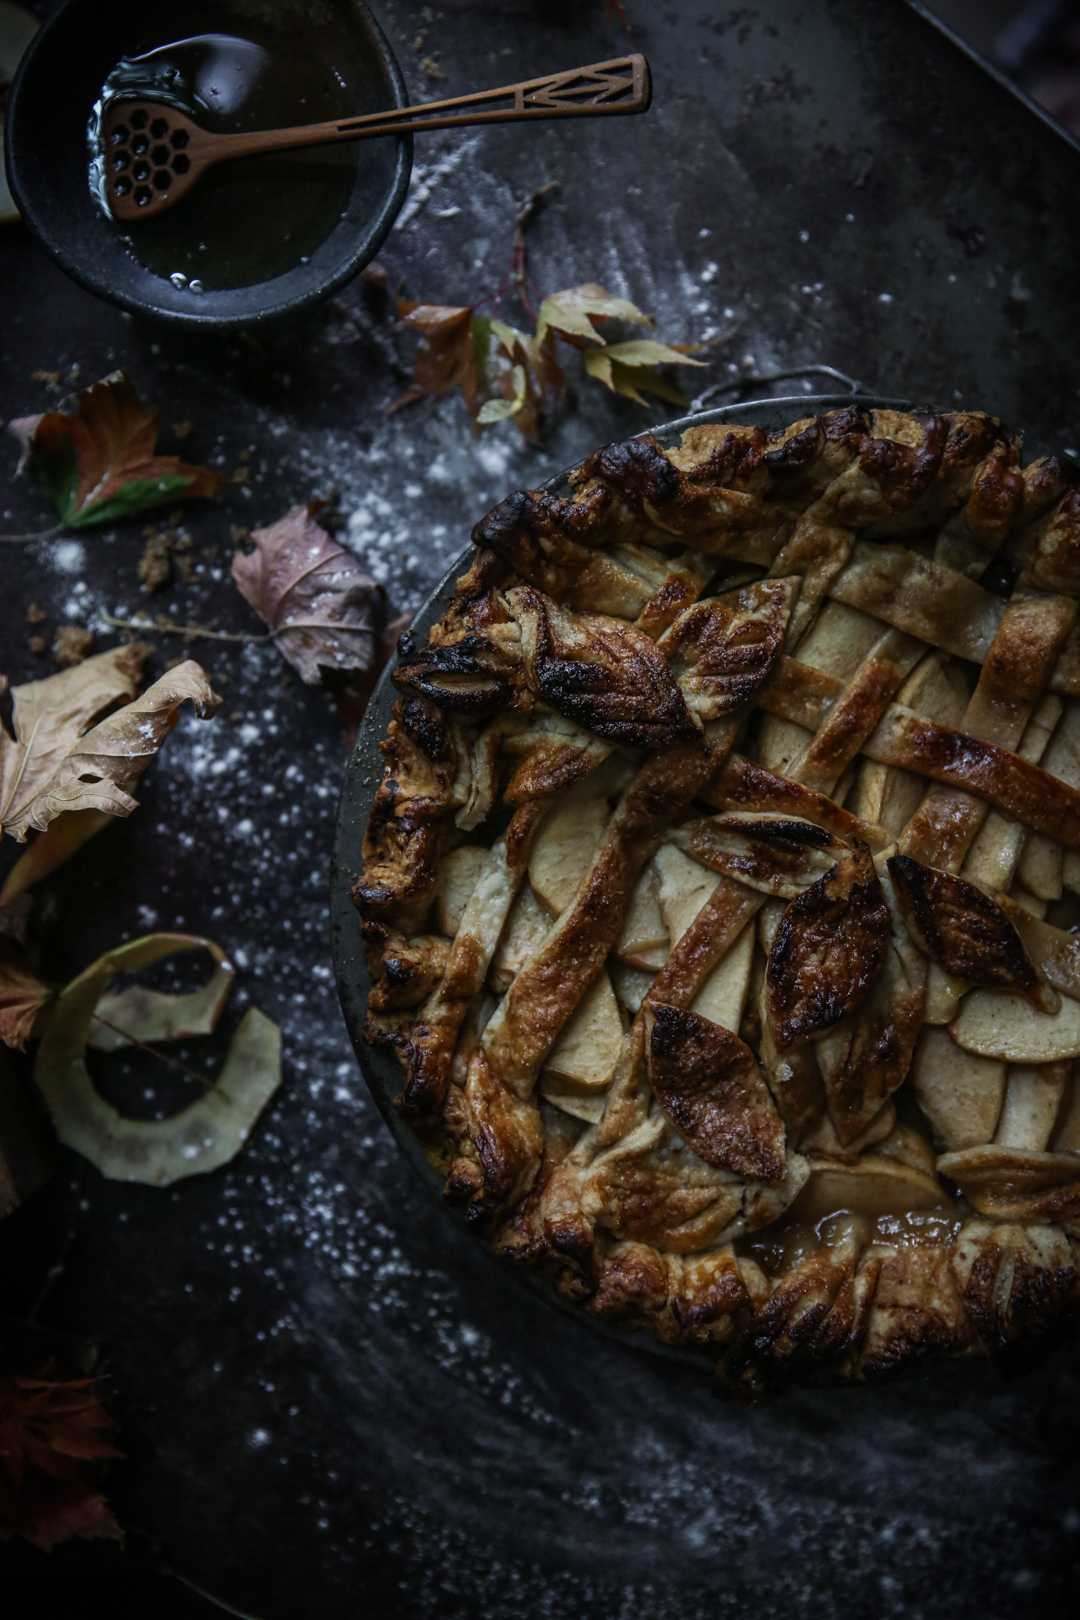 apple-bourbon-pie-photography-recipe-and-styling-by-christiann-koepke-of-christiannkoepke-com-15